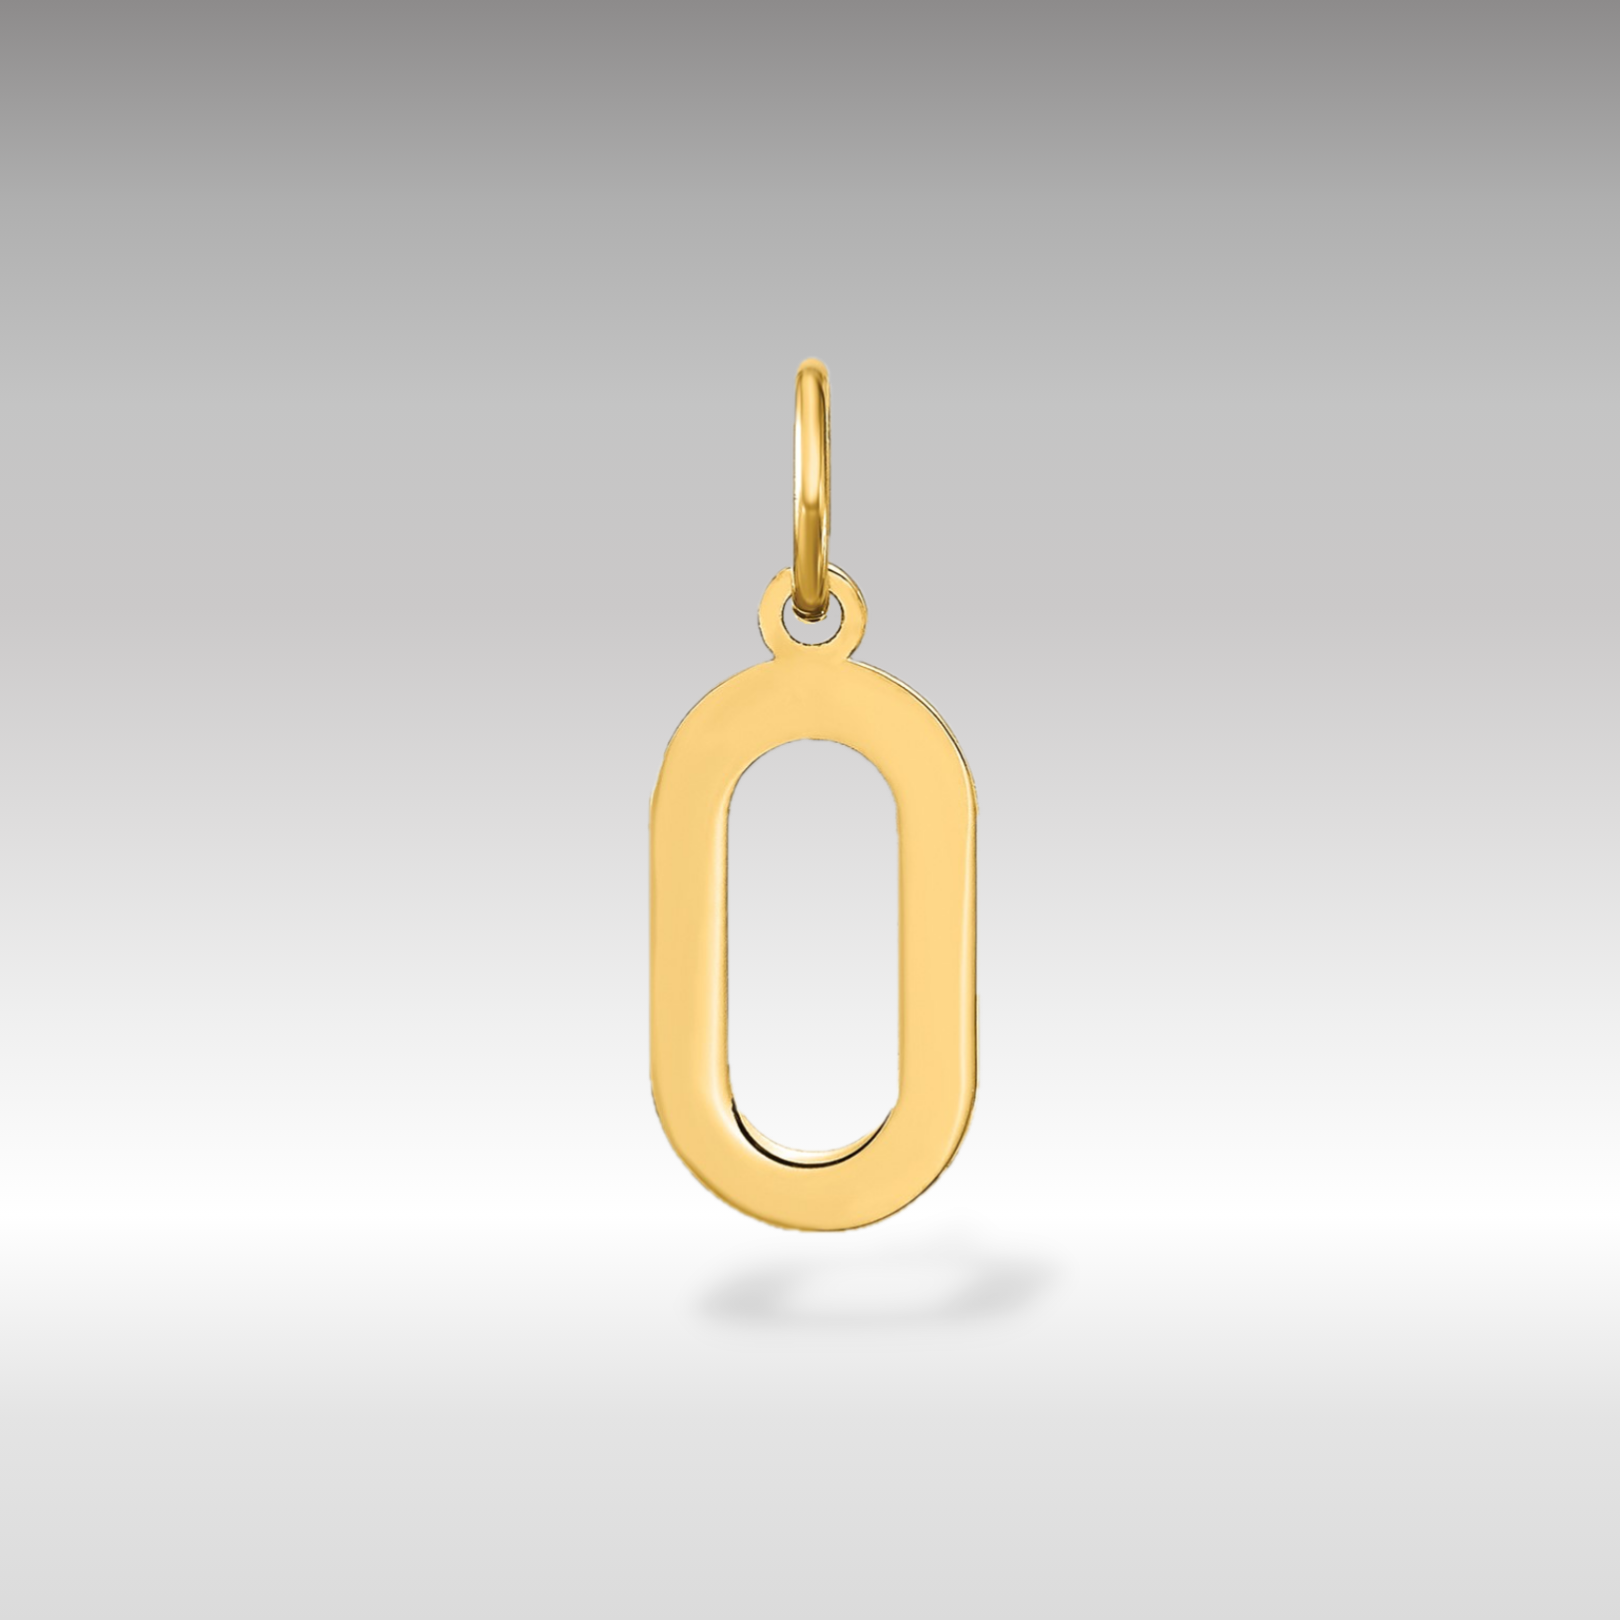 14K Gold Letter "O" Initial Pendant - Charlie & Co. Jewelry